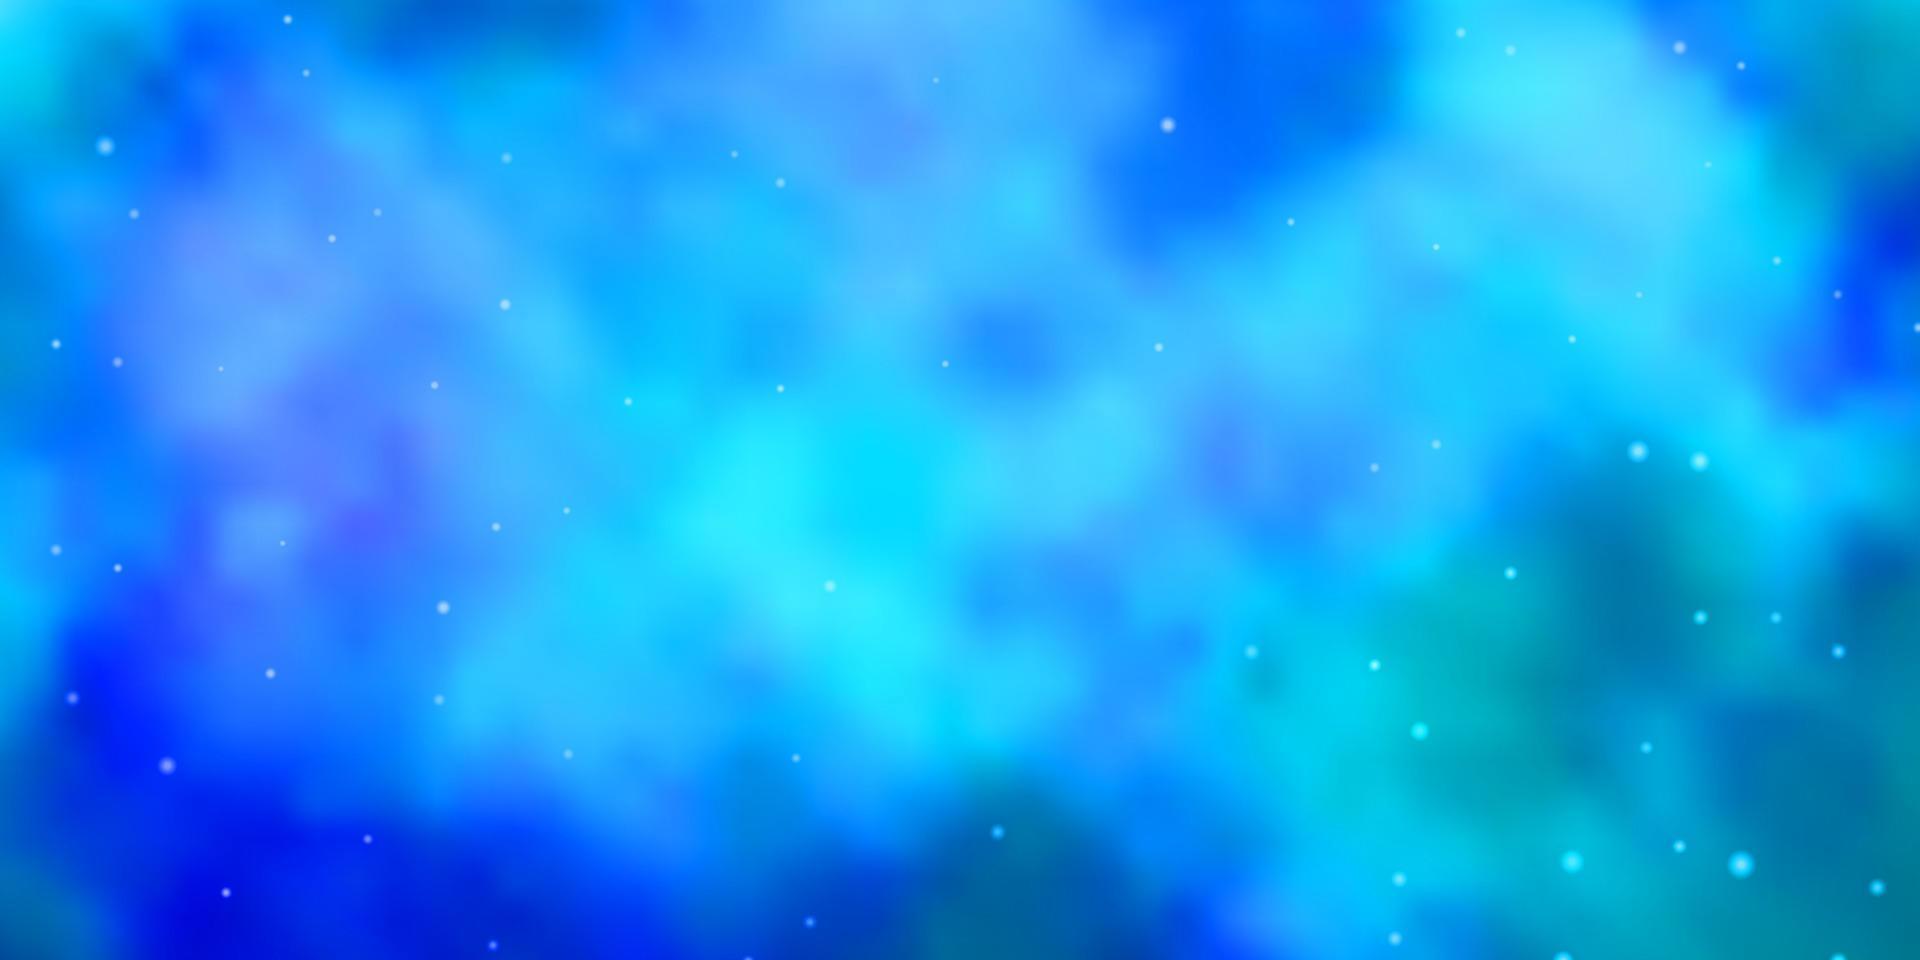 Light BLUE vector background with colorful stars.